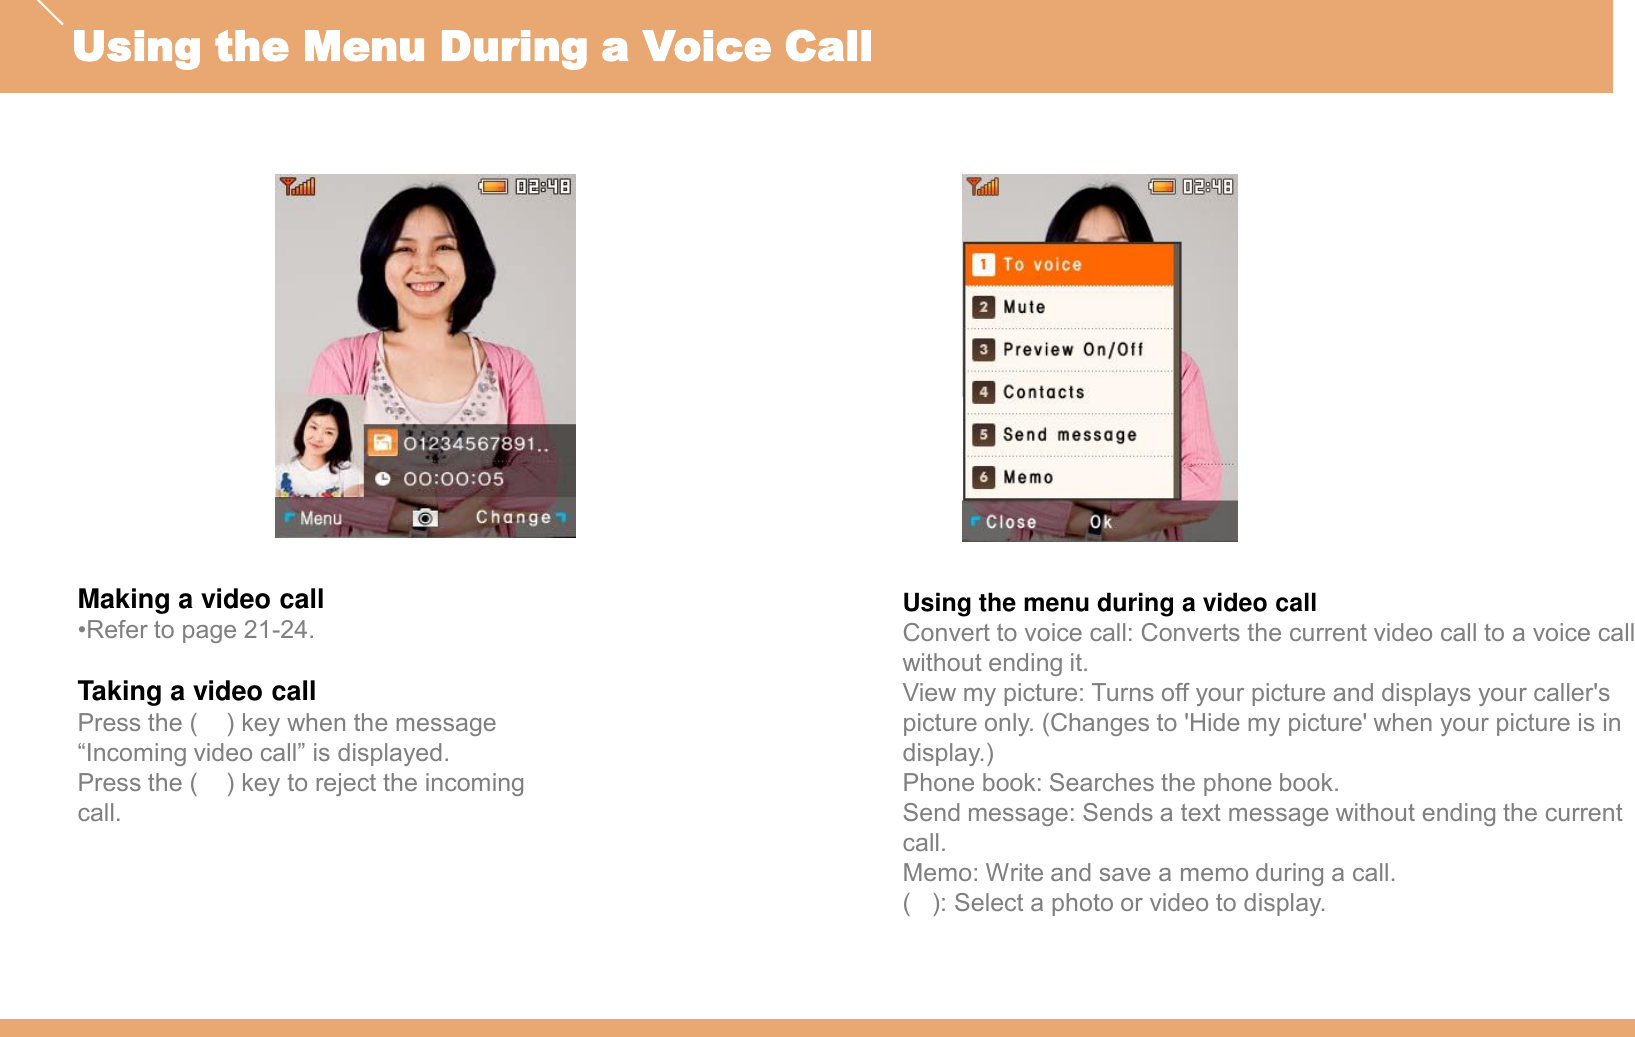 Making a video call•Refer to page 21-24.Taking a video callPress the (    ) key when the message “Incoming video call” is displayed.Press the (    ) key to reject the incoming call.Using the menu during a video callConvert to voice call: Converts the current video call to a voice call without ending it.View my picture: Turns off your picture and displays your caller&apos;s picture only. (Changes to &apos;Hide my picture&apos; when your picture is in display.)Phone book: Searches the phone book.Send message: Sends a text message without ending the current call.Memo: Write and save a memo during a call.(   ): Select a photo or video to display.Using the Menu During a Voice Call